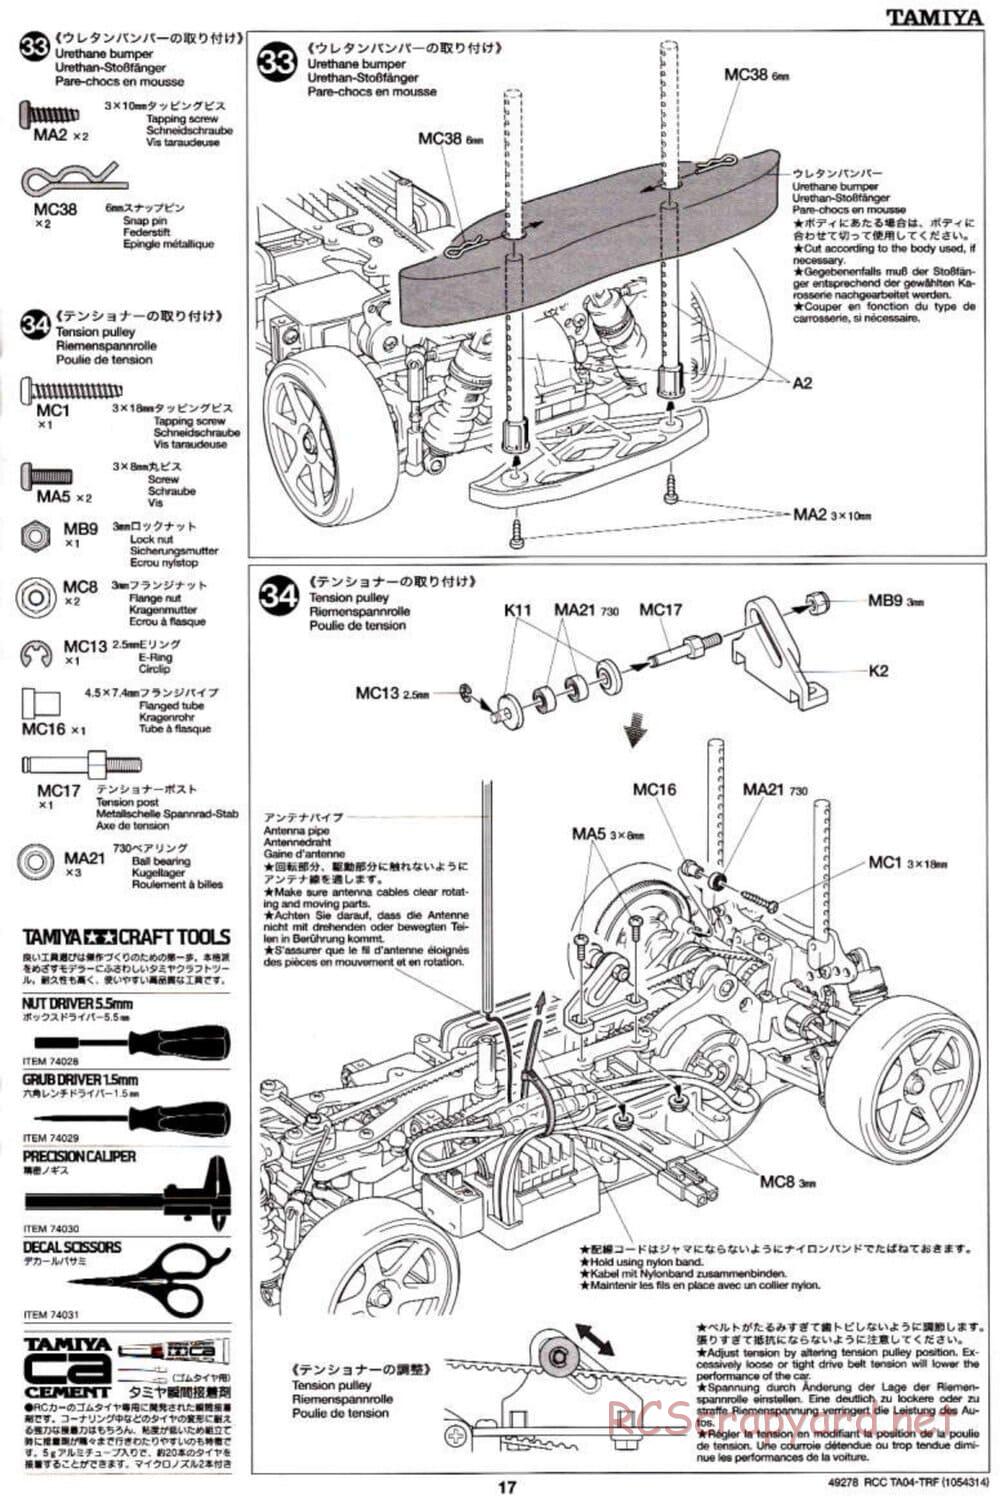 Tamiya - TA-04 TRF Special Chassis Chassis - Manual - Page 17